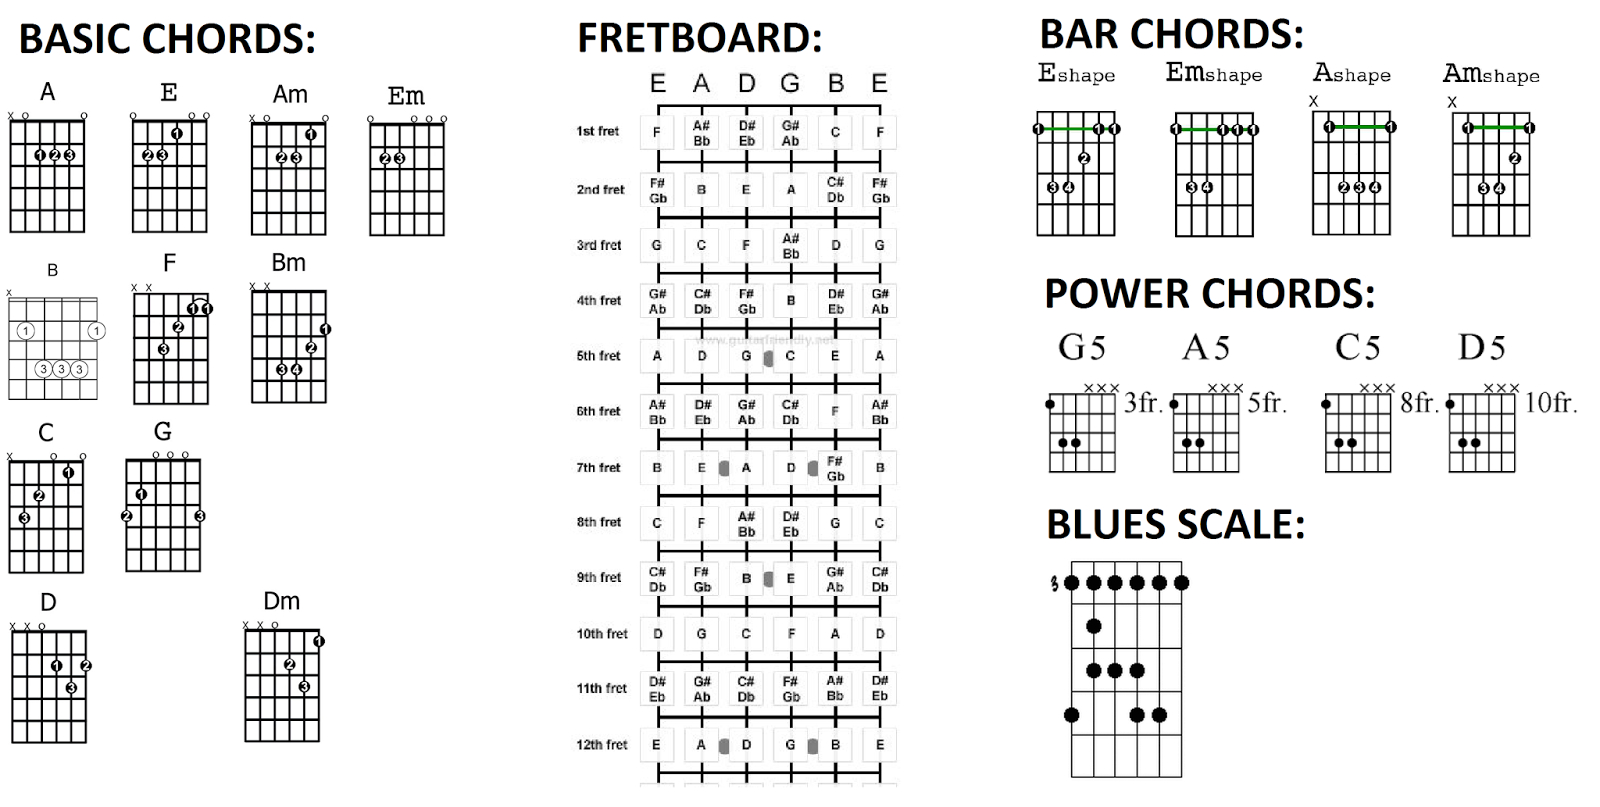 Rivers And Roads Chords Chord Progressions Galore 2017